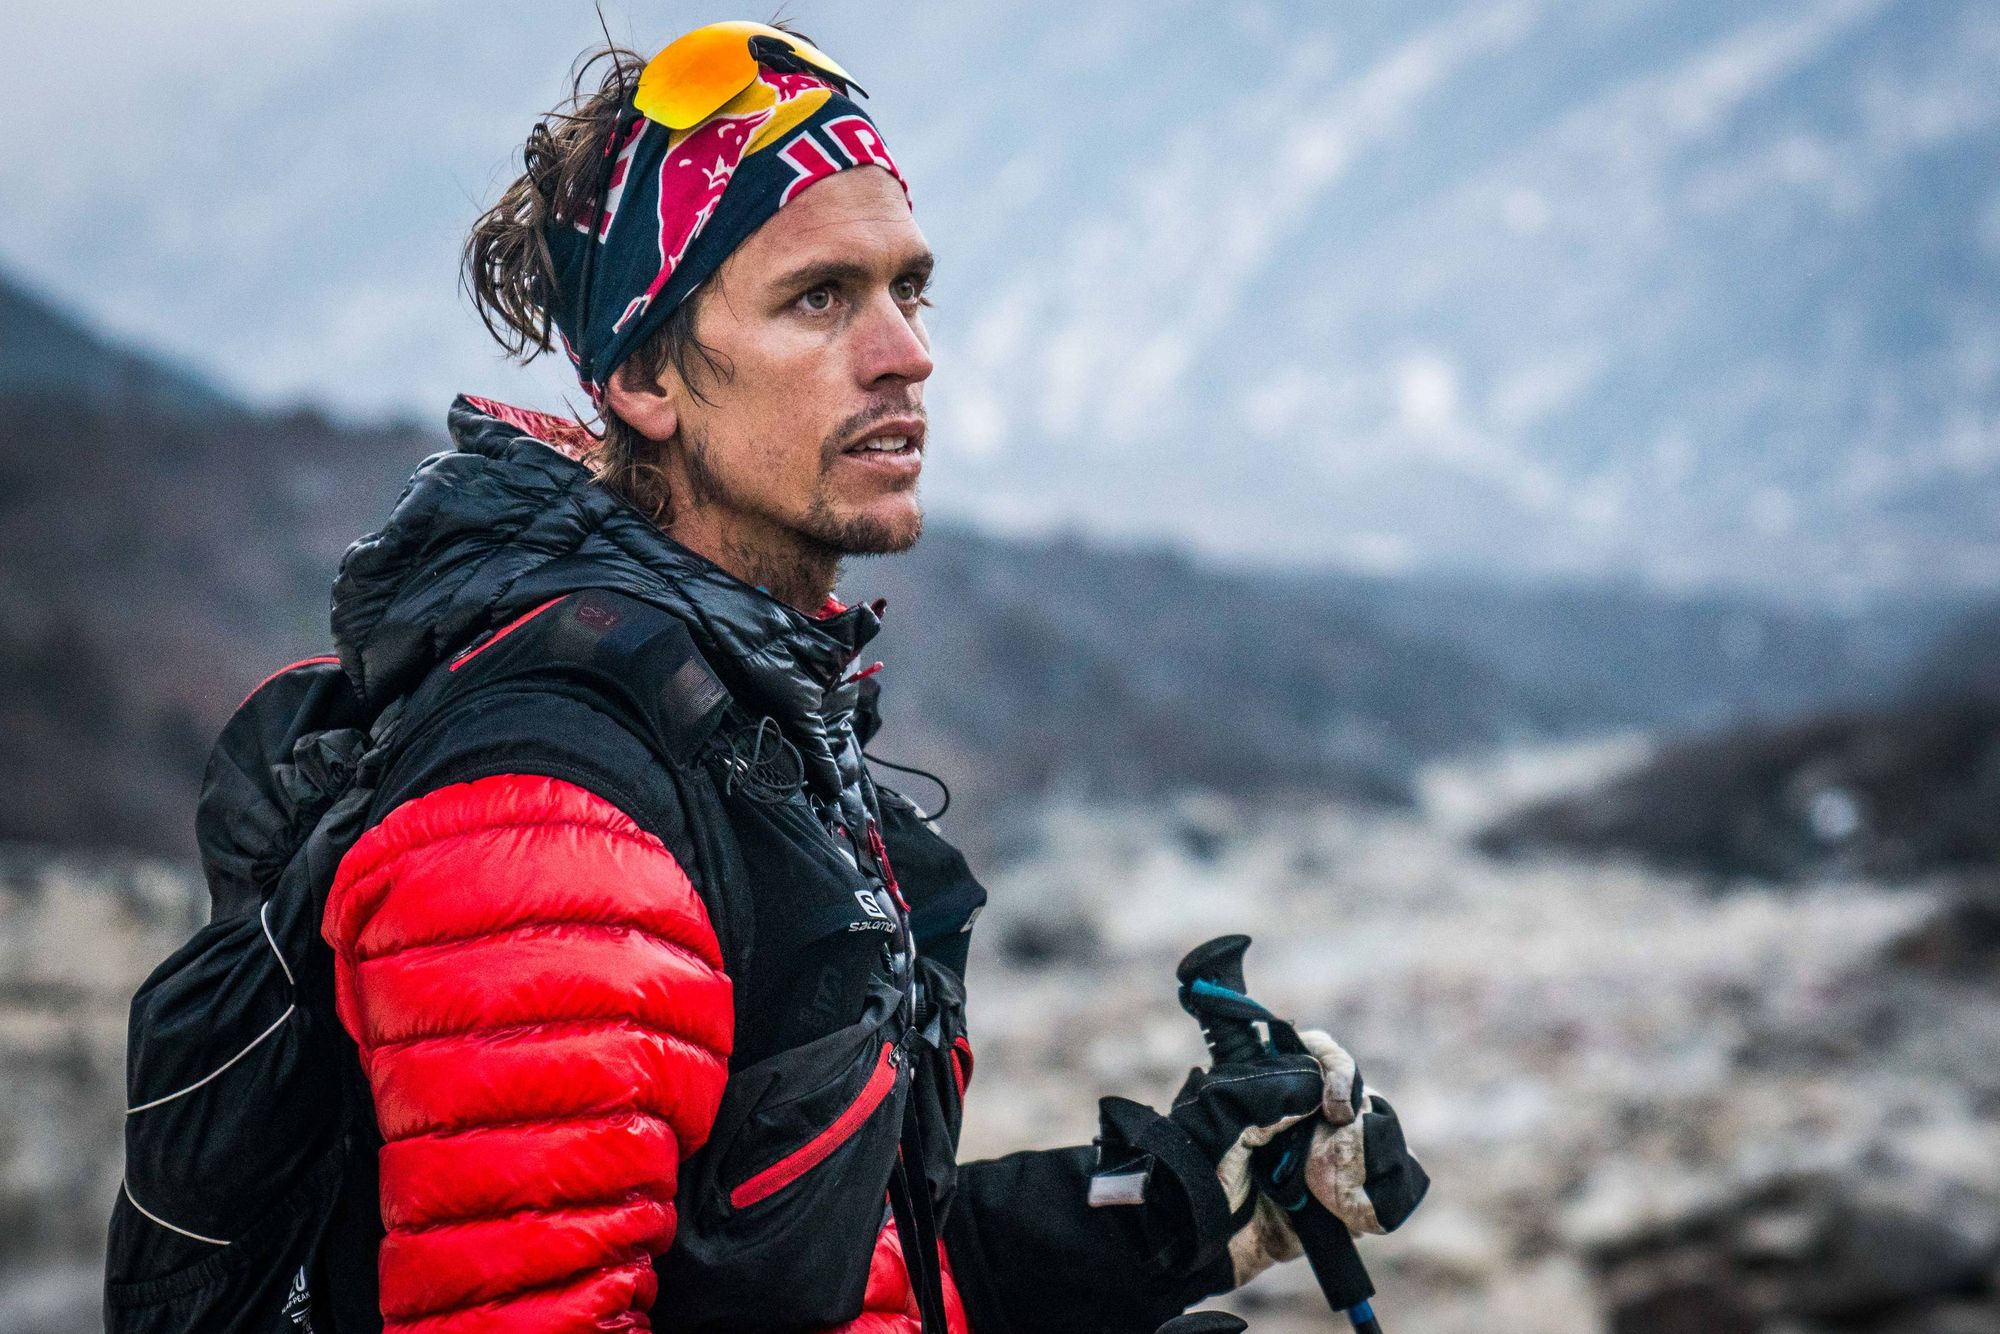 Ryan Sandes in the Manaslu Valley, Nepal after coming over Larke La Pass (5,135m) on March 12, 2018.